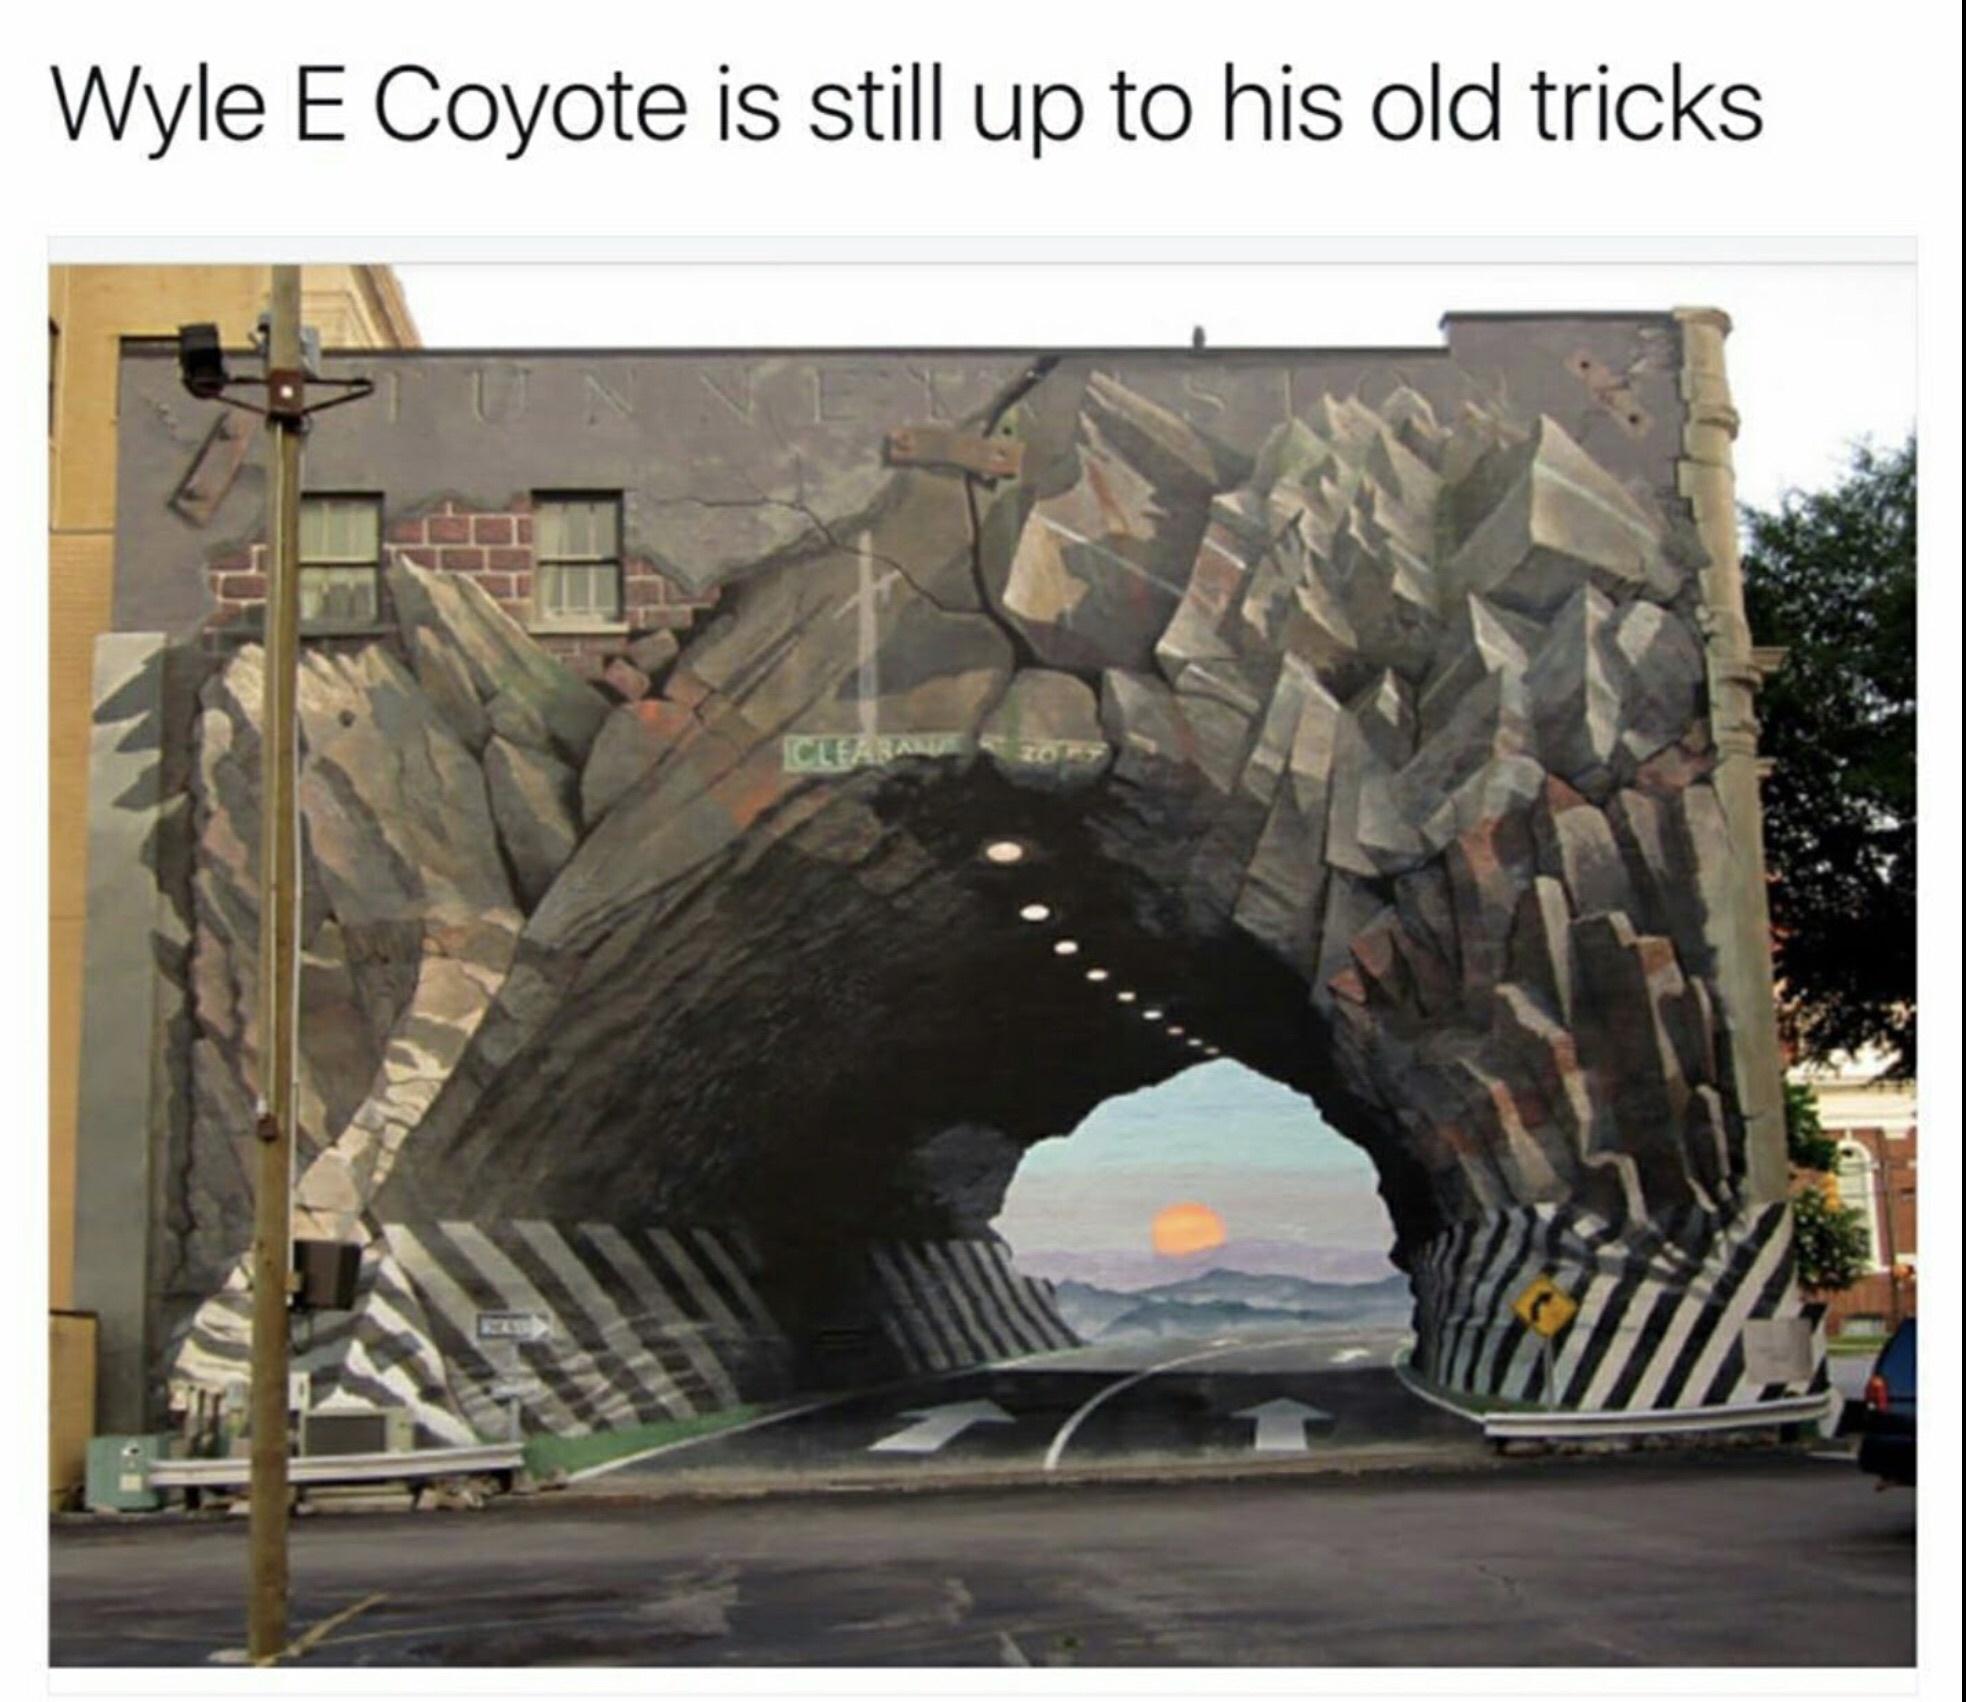 funny pics and memes - tunnel vision street art - Wyle E Coyote is still up to his old tricks